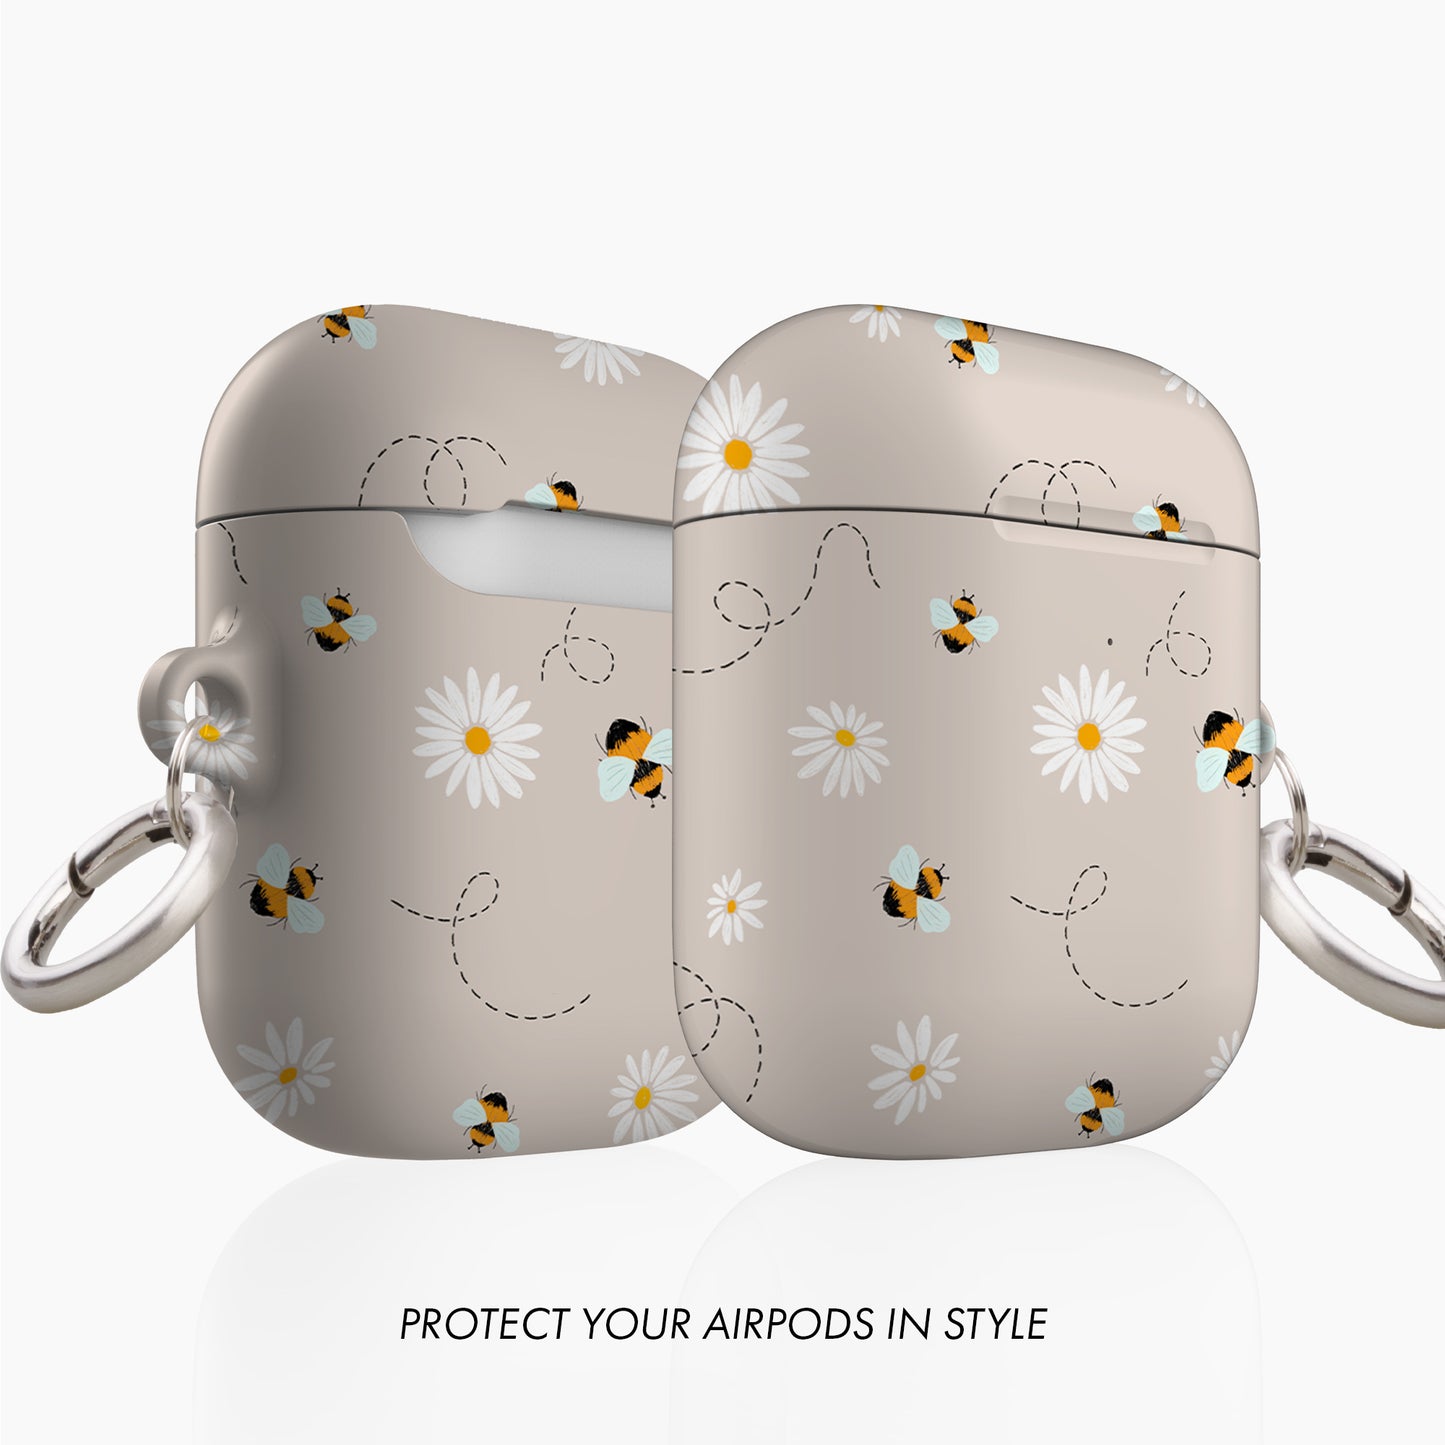 Busy Bees - AirPods Case